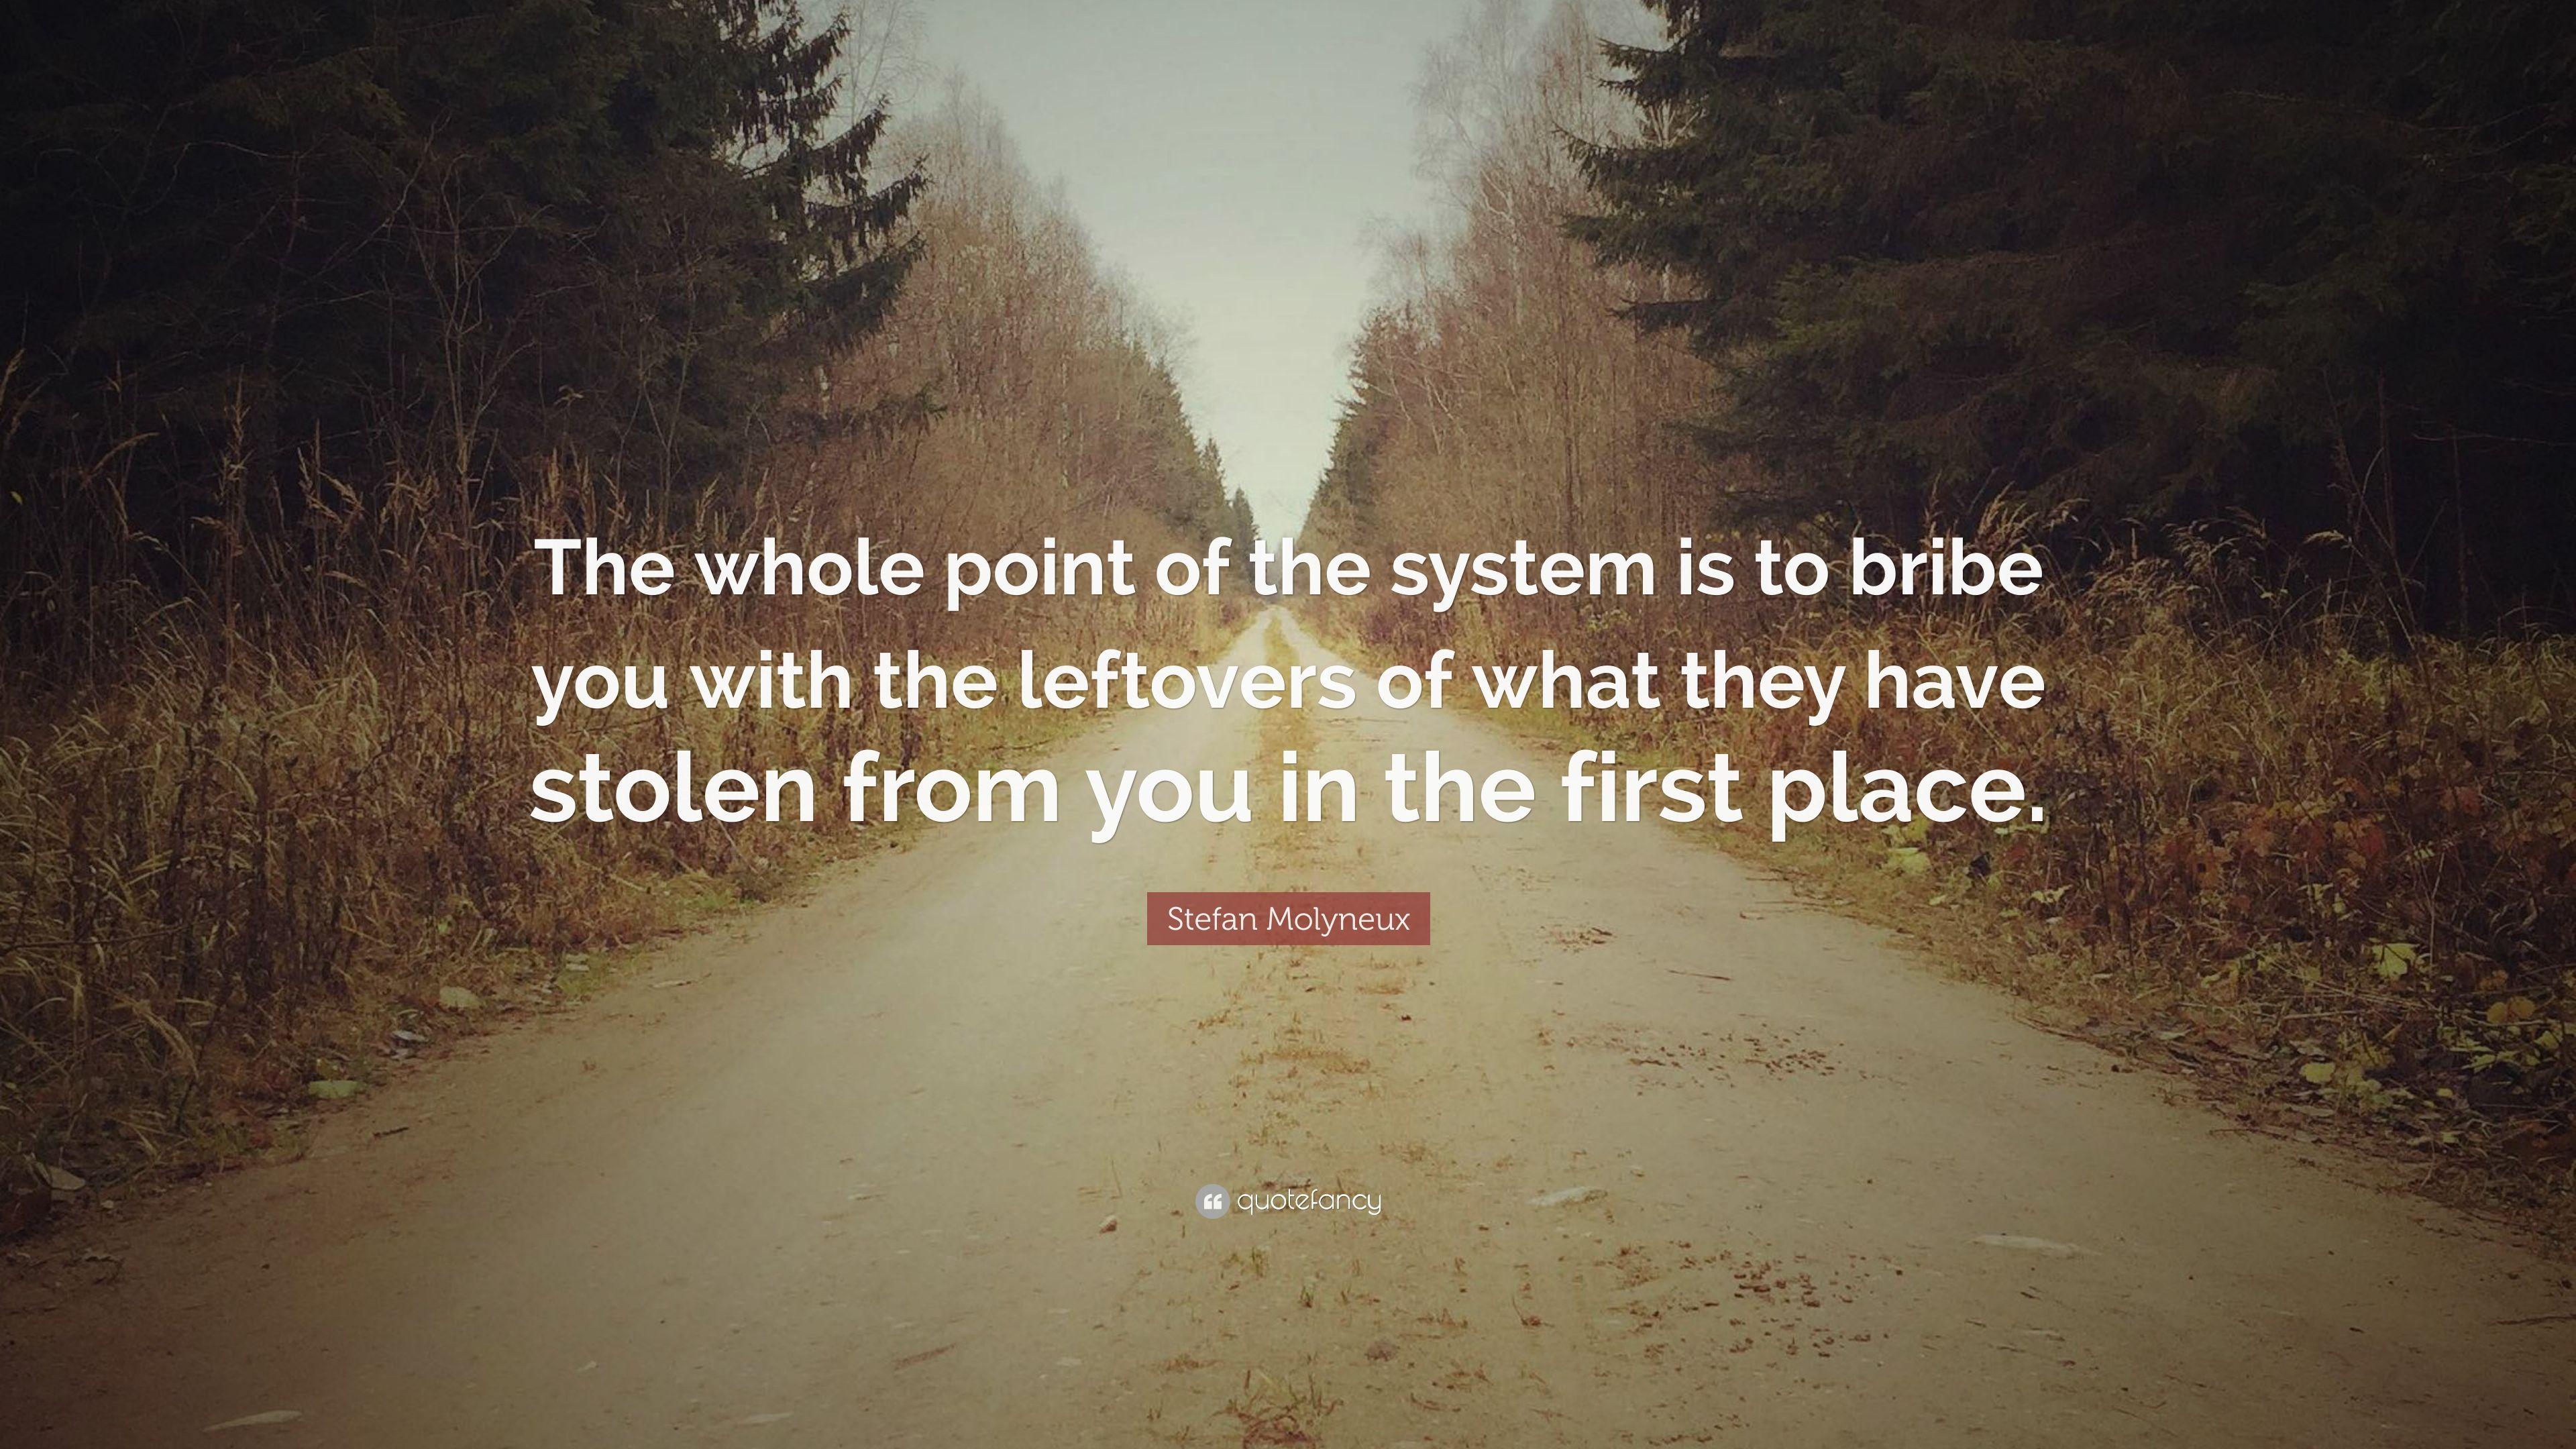 Stefan Molyneux Quote: “The whole point of the system is to bribe